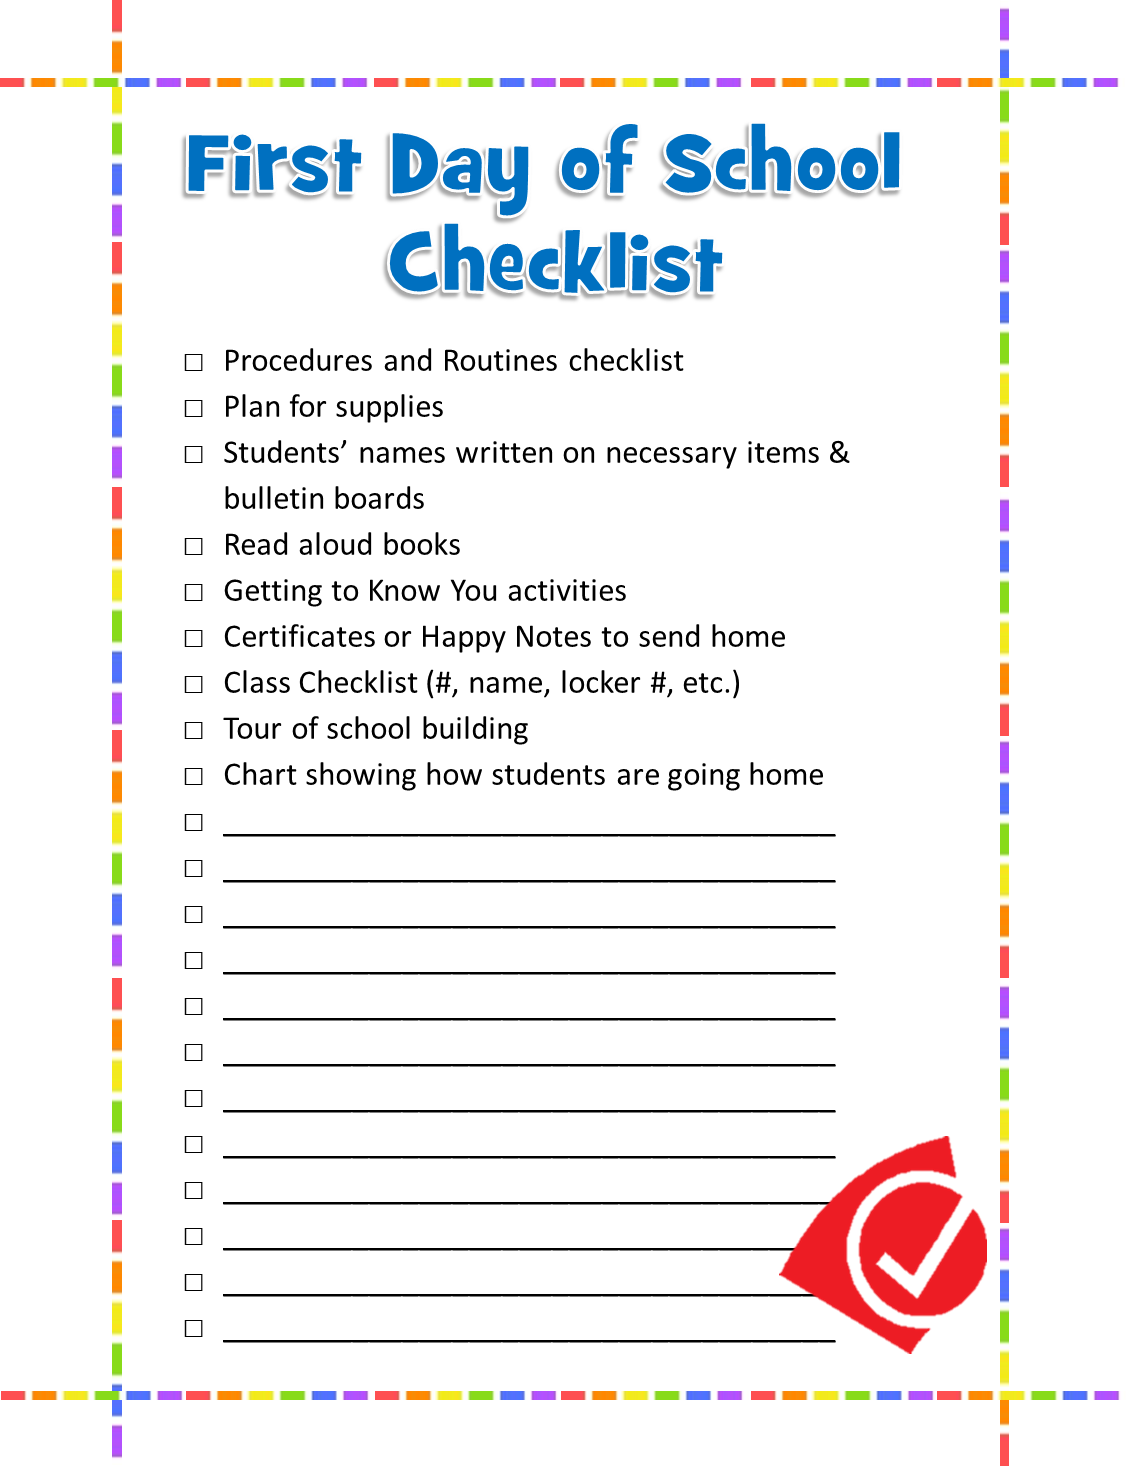 Schedule clipart daily checklist. First day of school